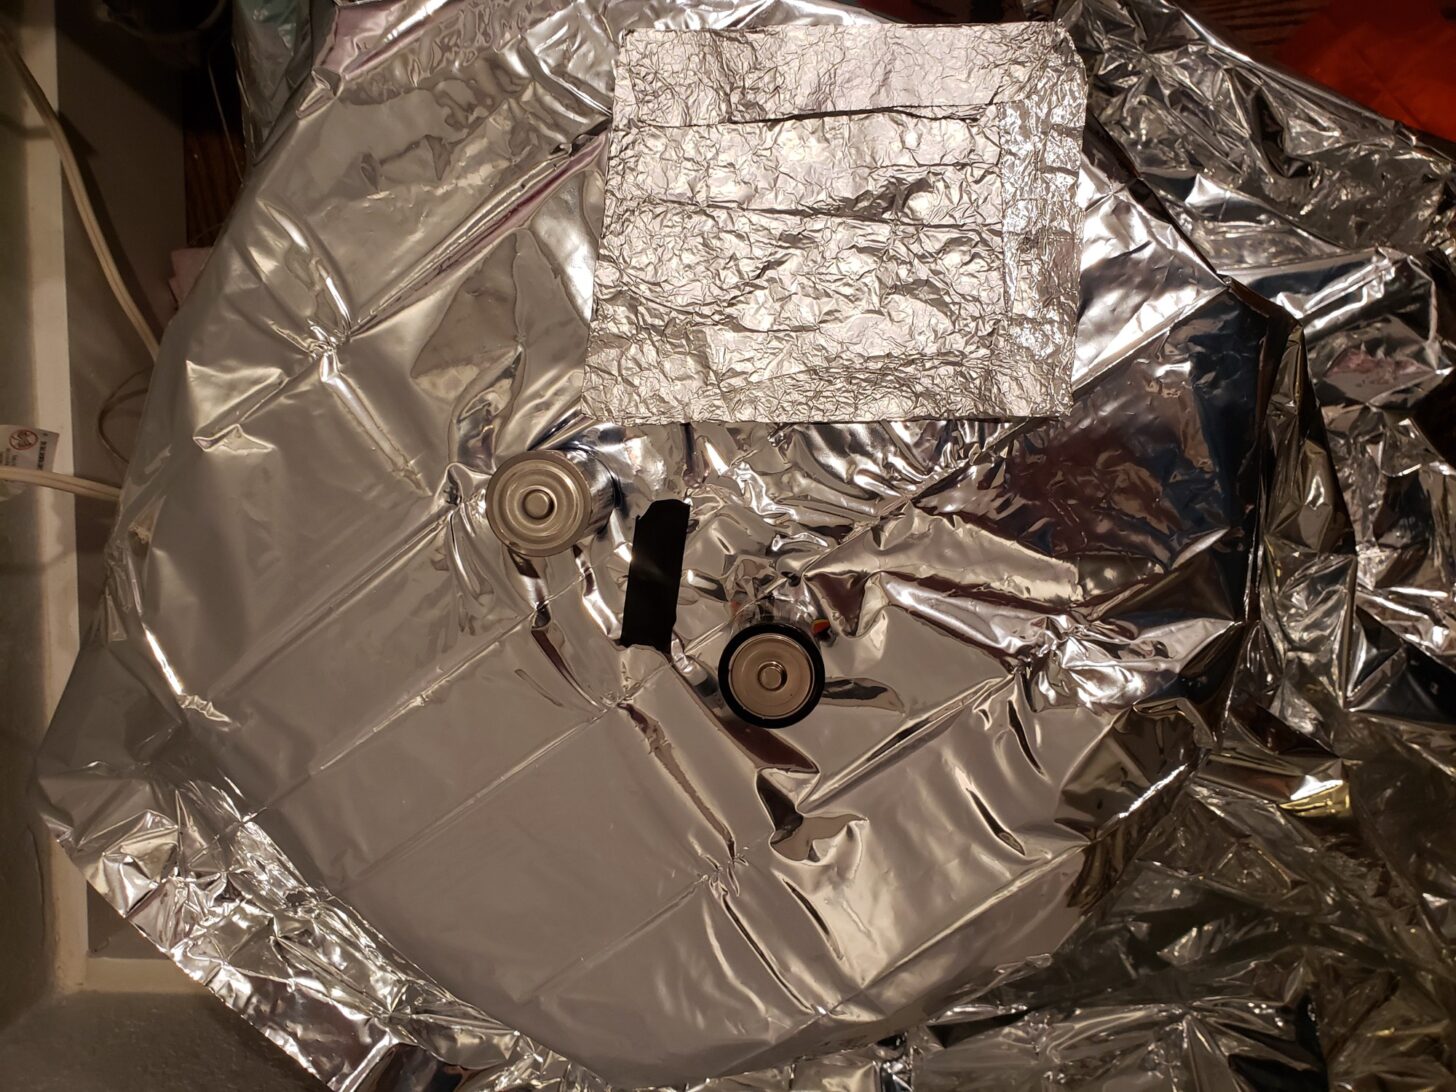 The SOL Survival Blanket stretched over a device for testing.